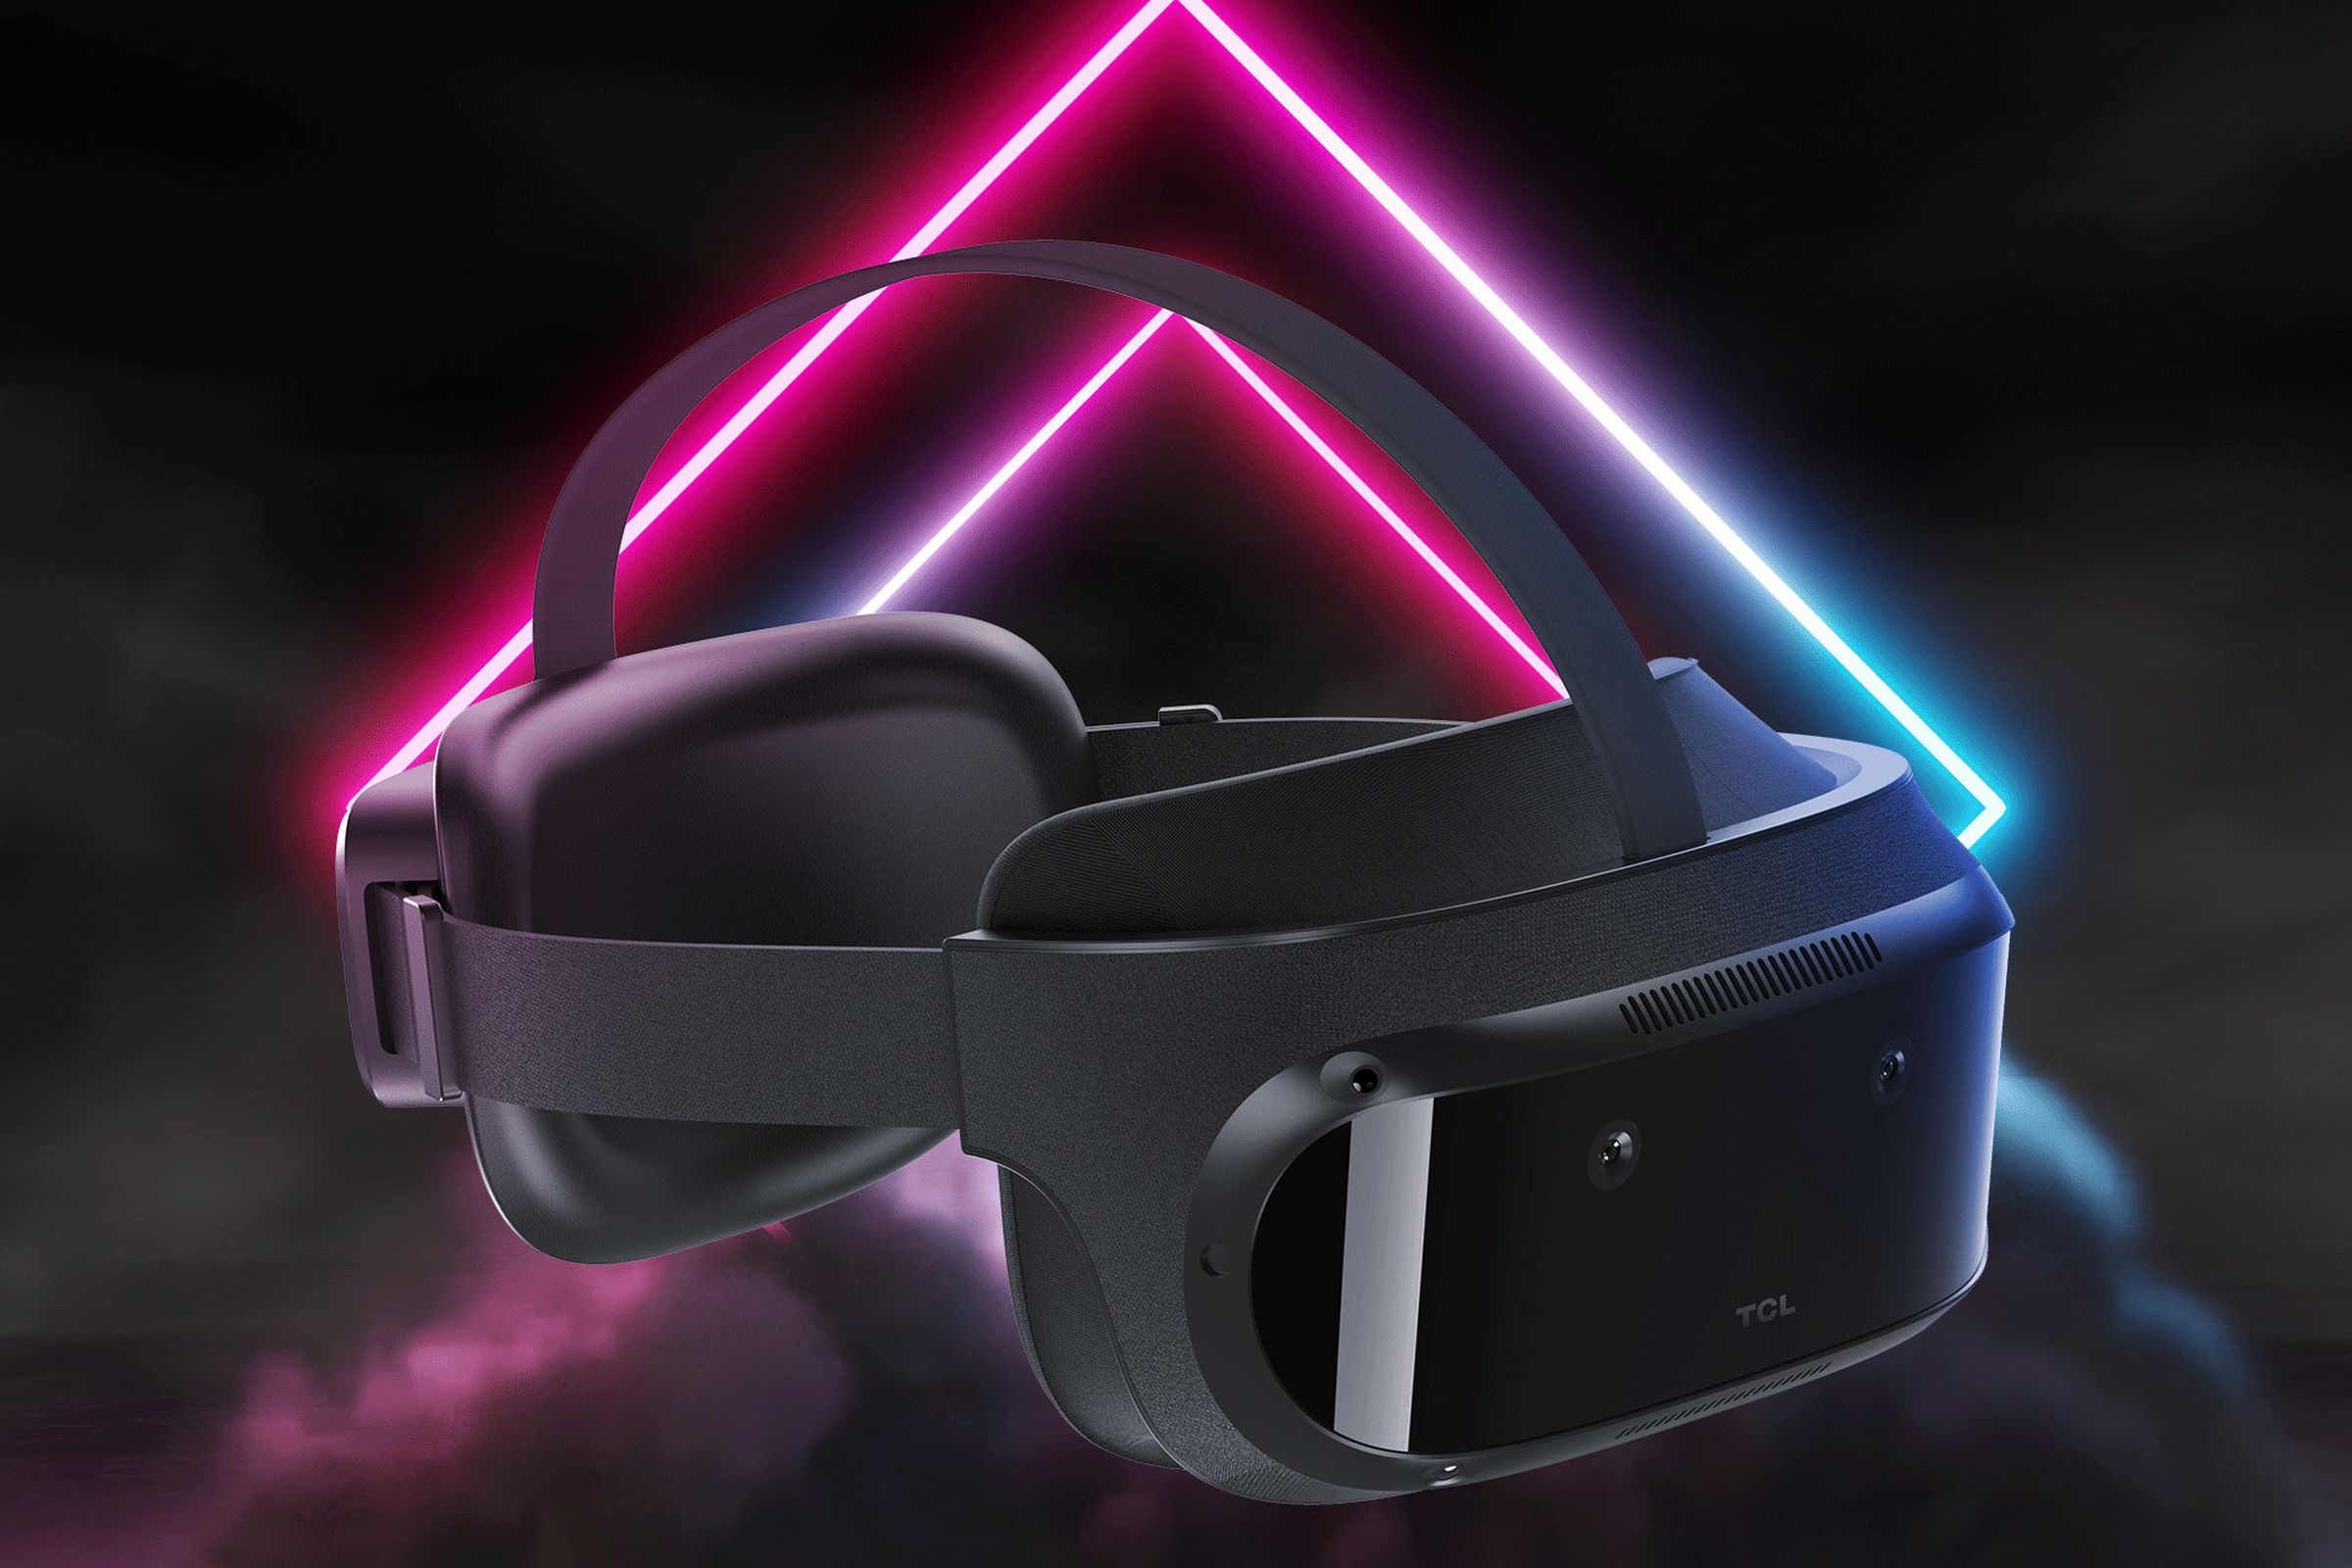 VR headset rendering on black background with neon purple and blue light.